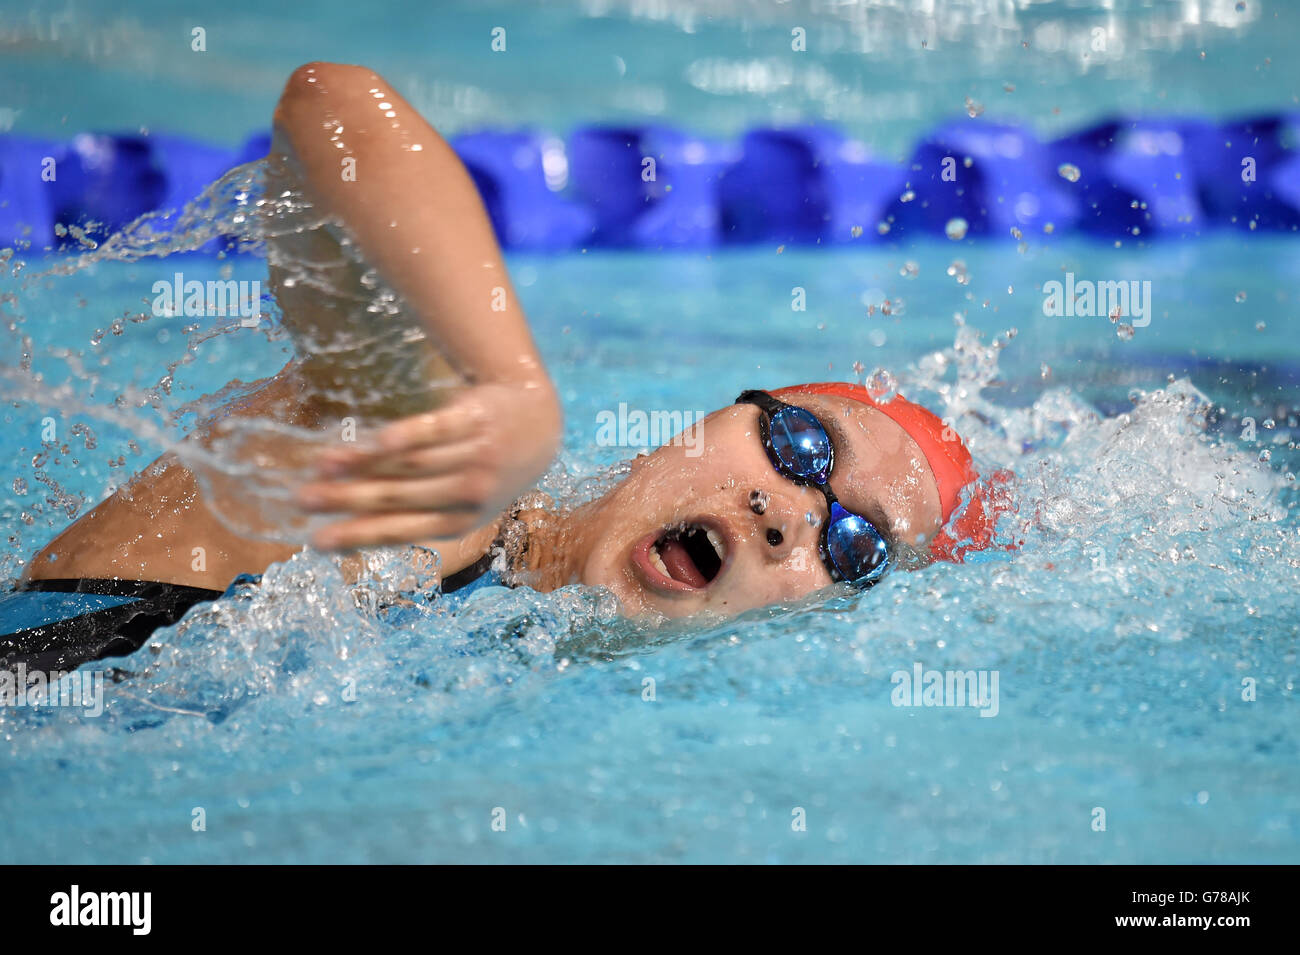 Malaysia's Erika Kong Chia Chia in action in the Women's 400m Individual Medley at Tolcross International Swimming Centre during the 2014 Commonwealth Games in Glasgow. Stock Photo